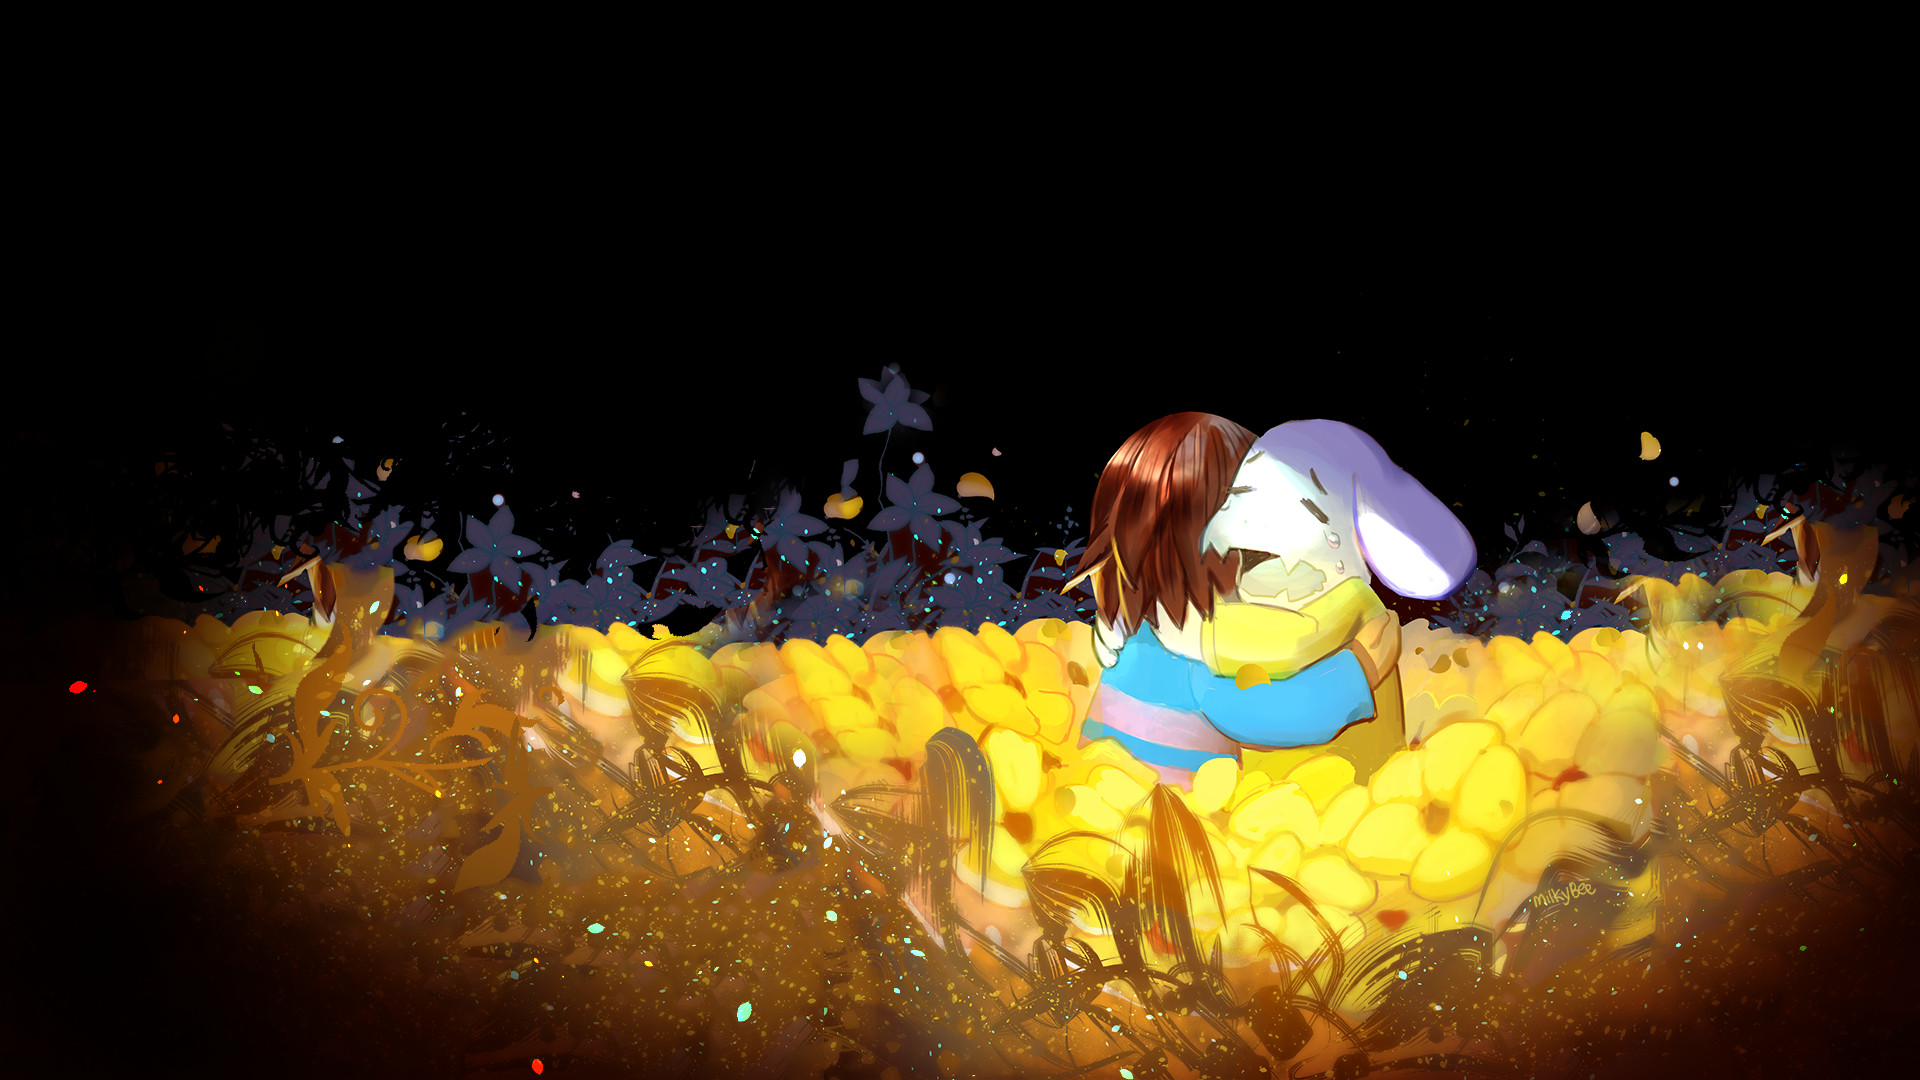 1920x1080 SPOILER] I made a wallpaper for my phone and pc : Undertale